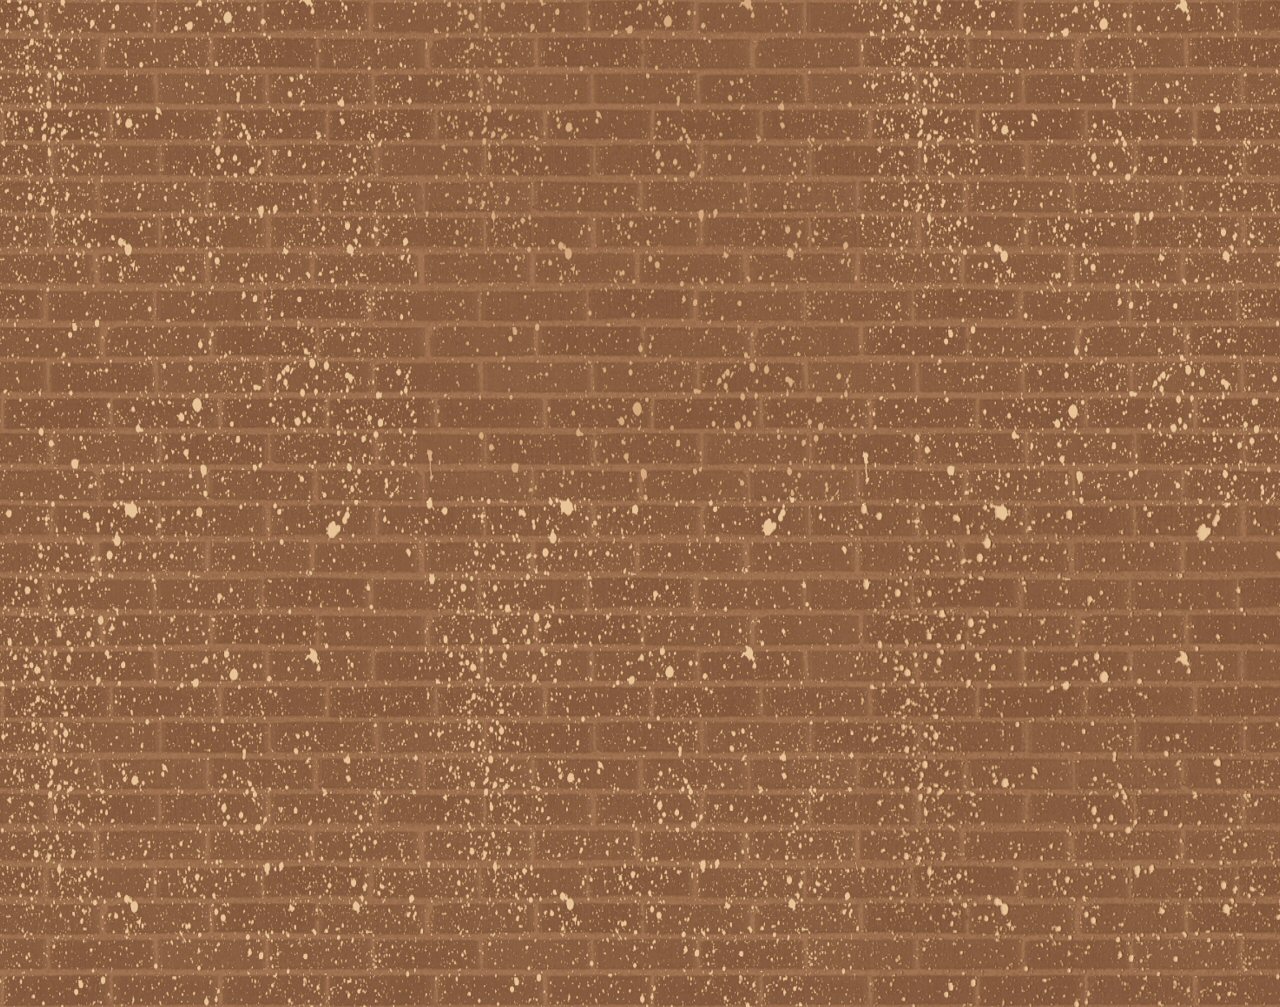 Distressed Brick Backgrounds